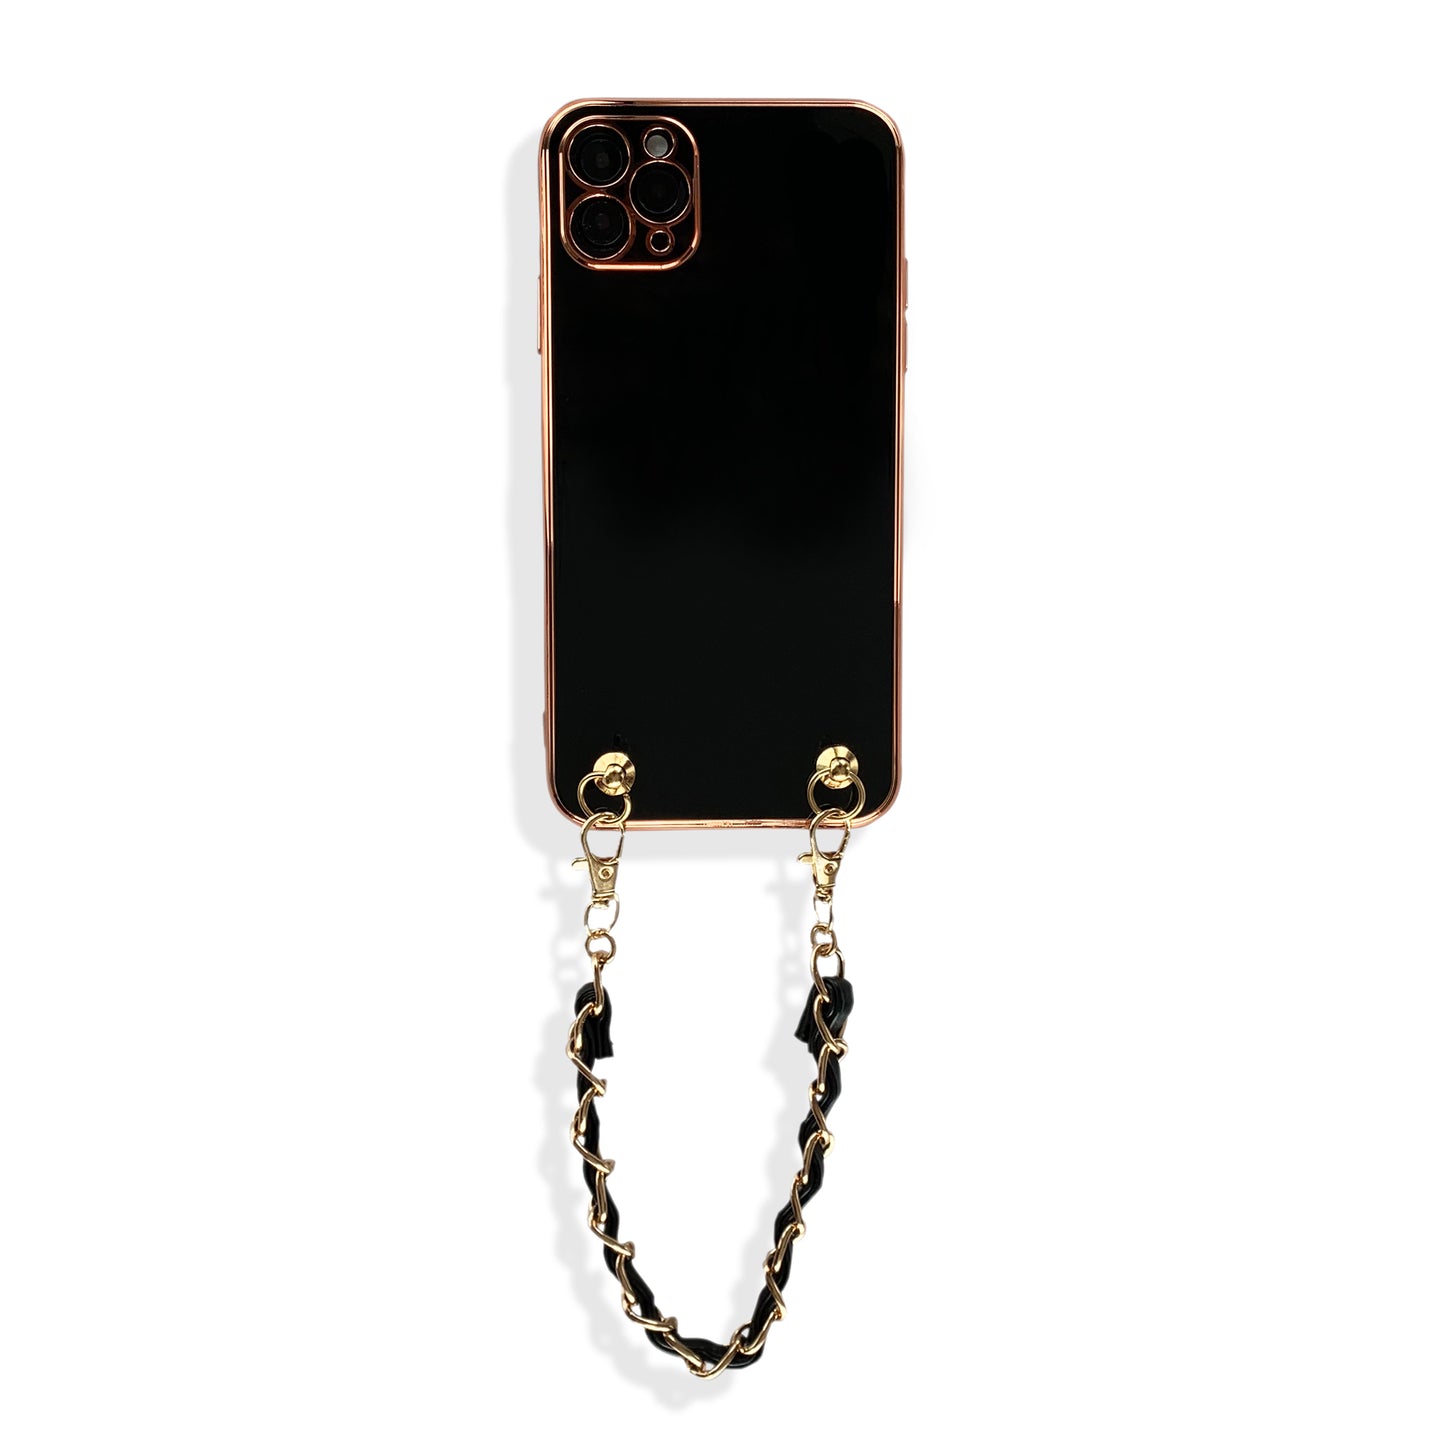 Black Glossy iPhone Case with Strap